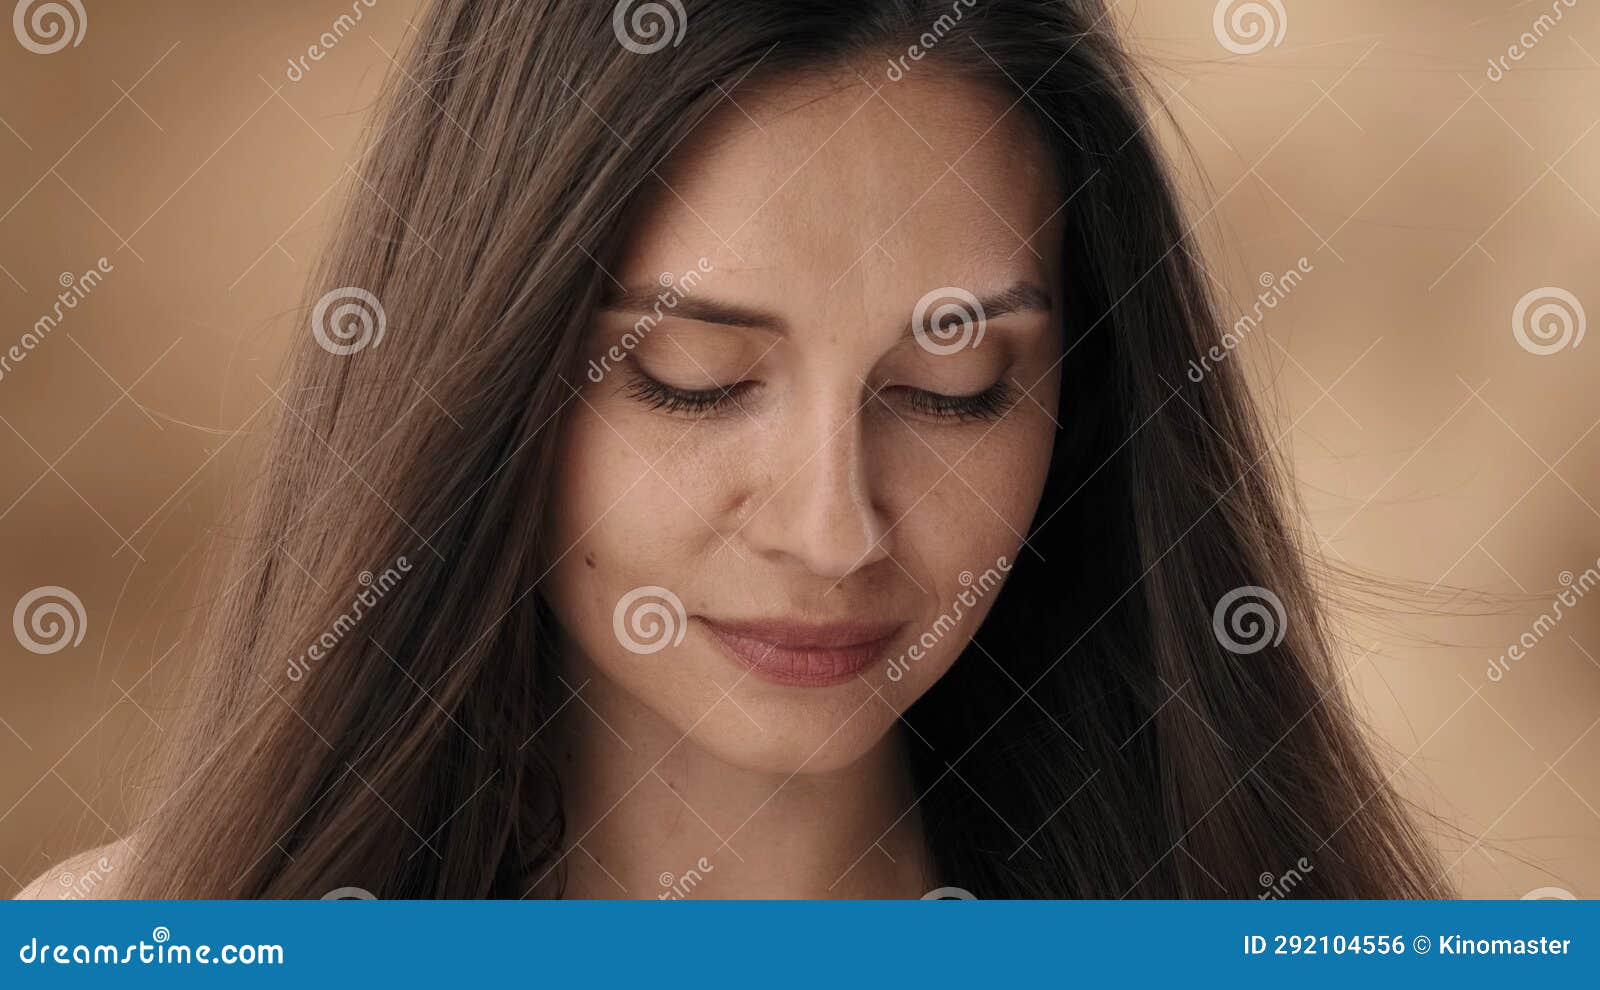 In A Close Up Shot Of A Middle Aged Attractive Woman With Dark Straight Hair She Tilts Her